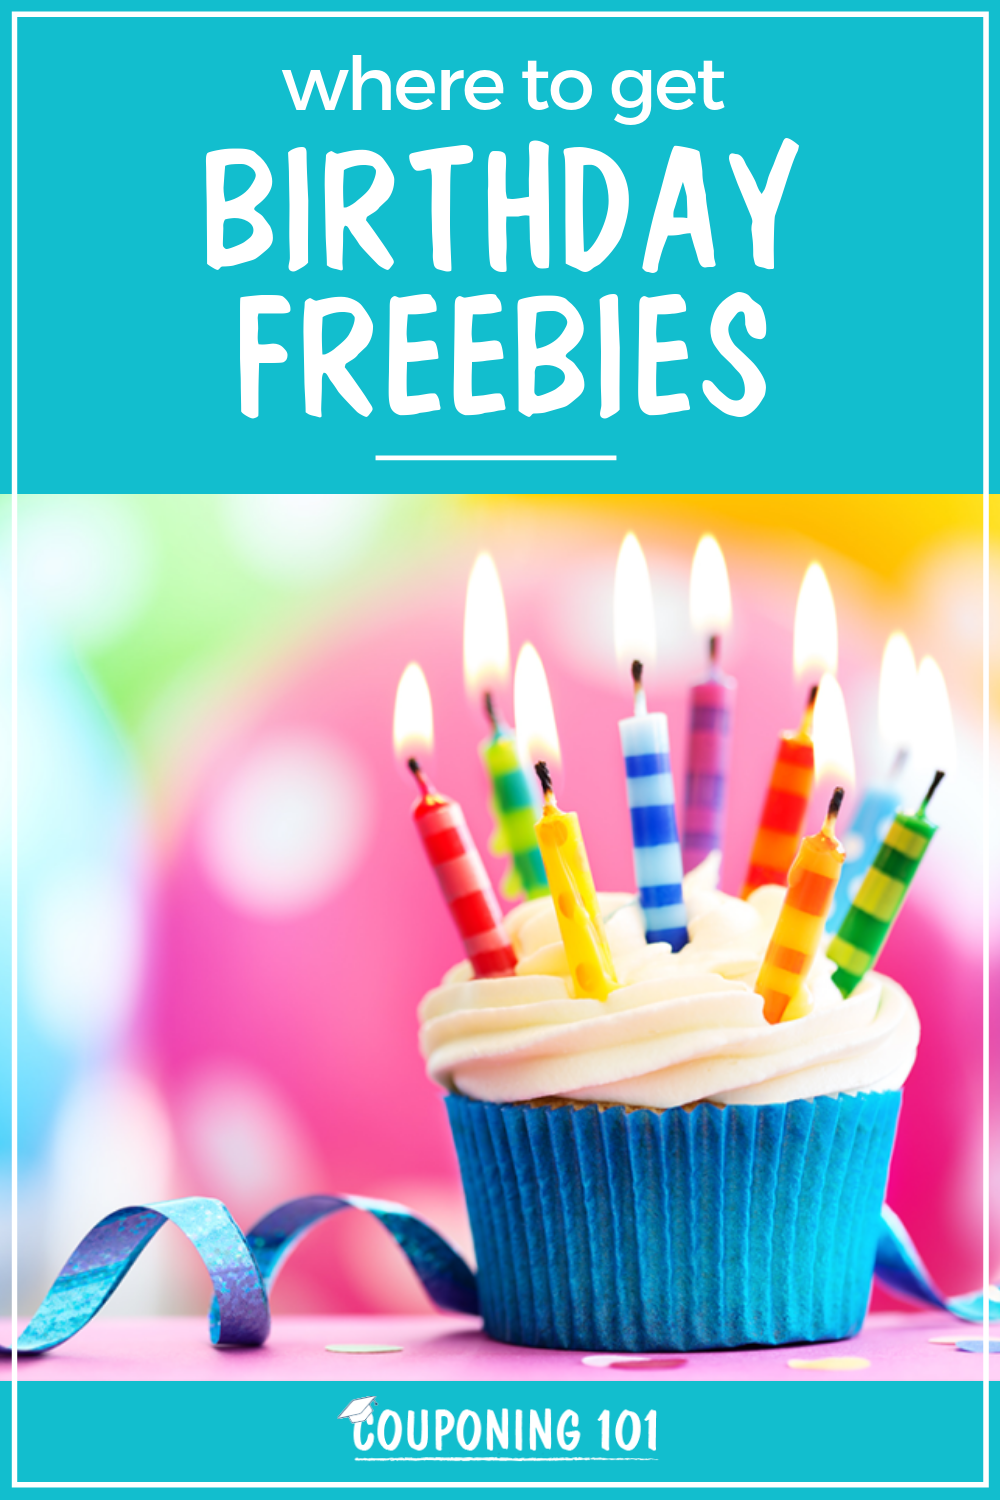 Where to Get Freebies on Your Birthday Couponing 101